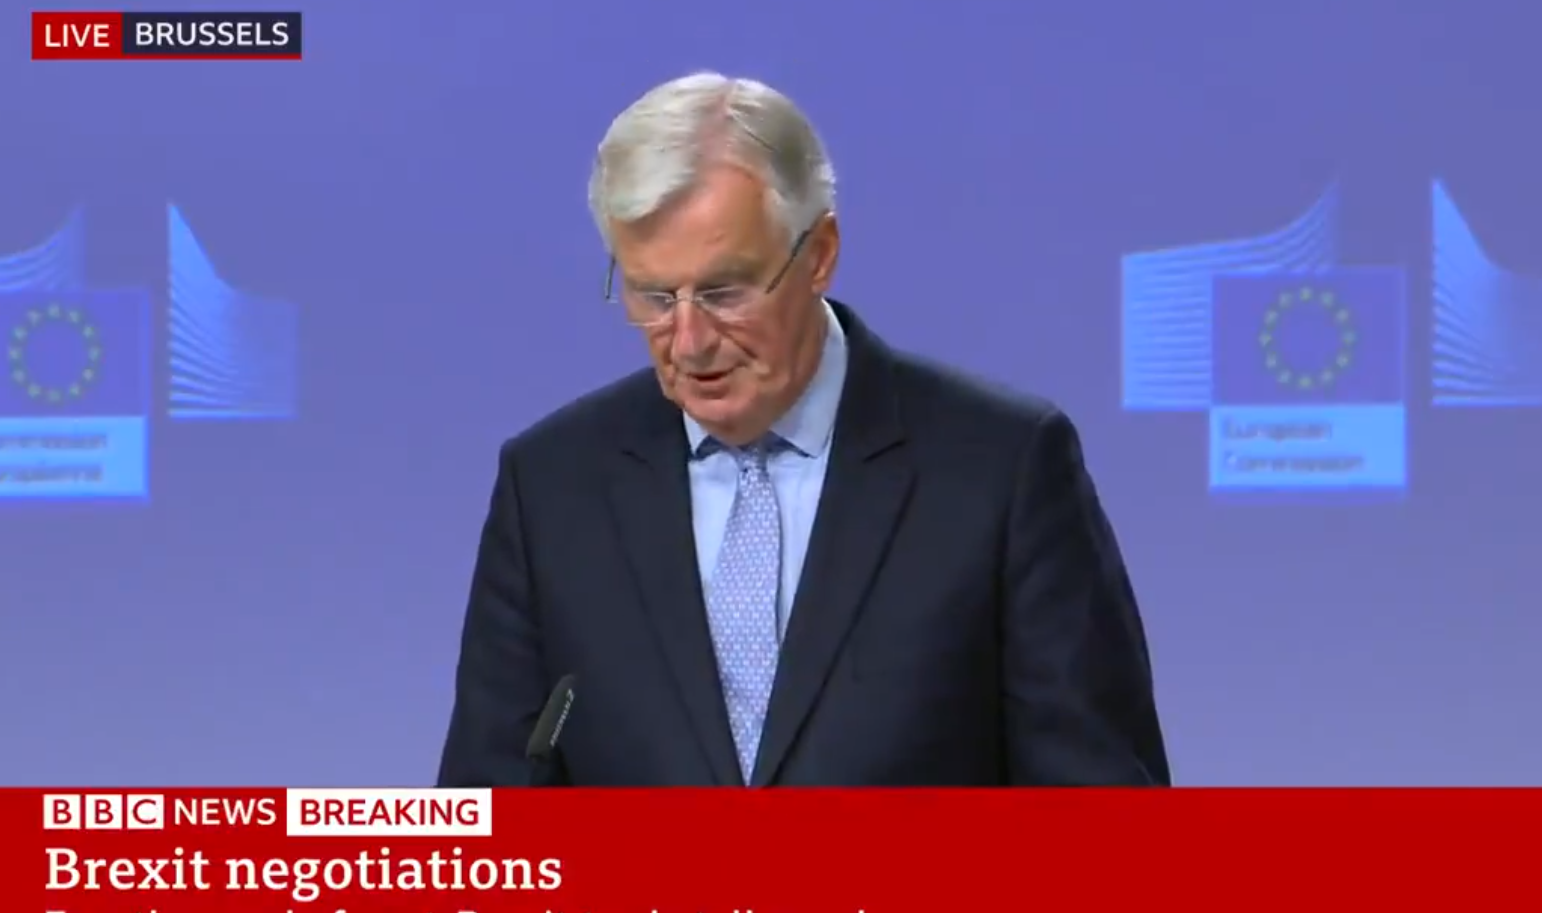 Micheal BArnier brexit deal update - no deal if no agreement by 31st october